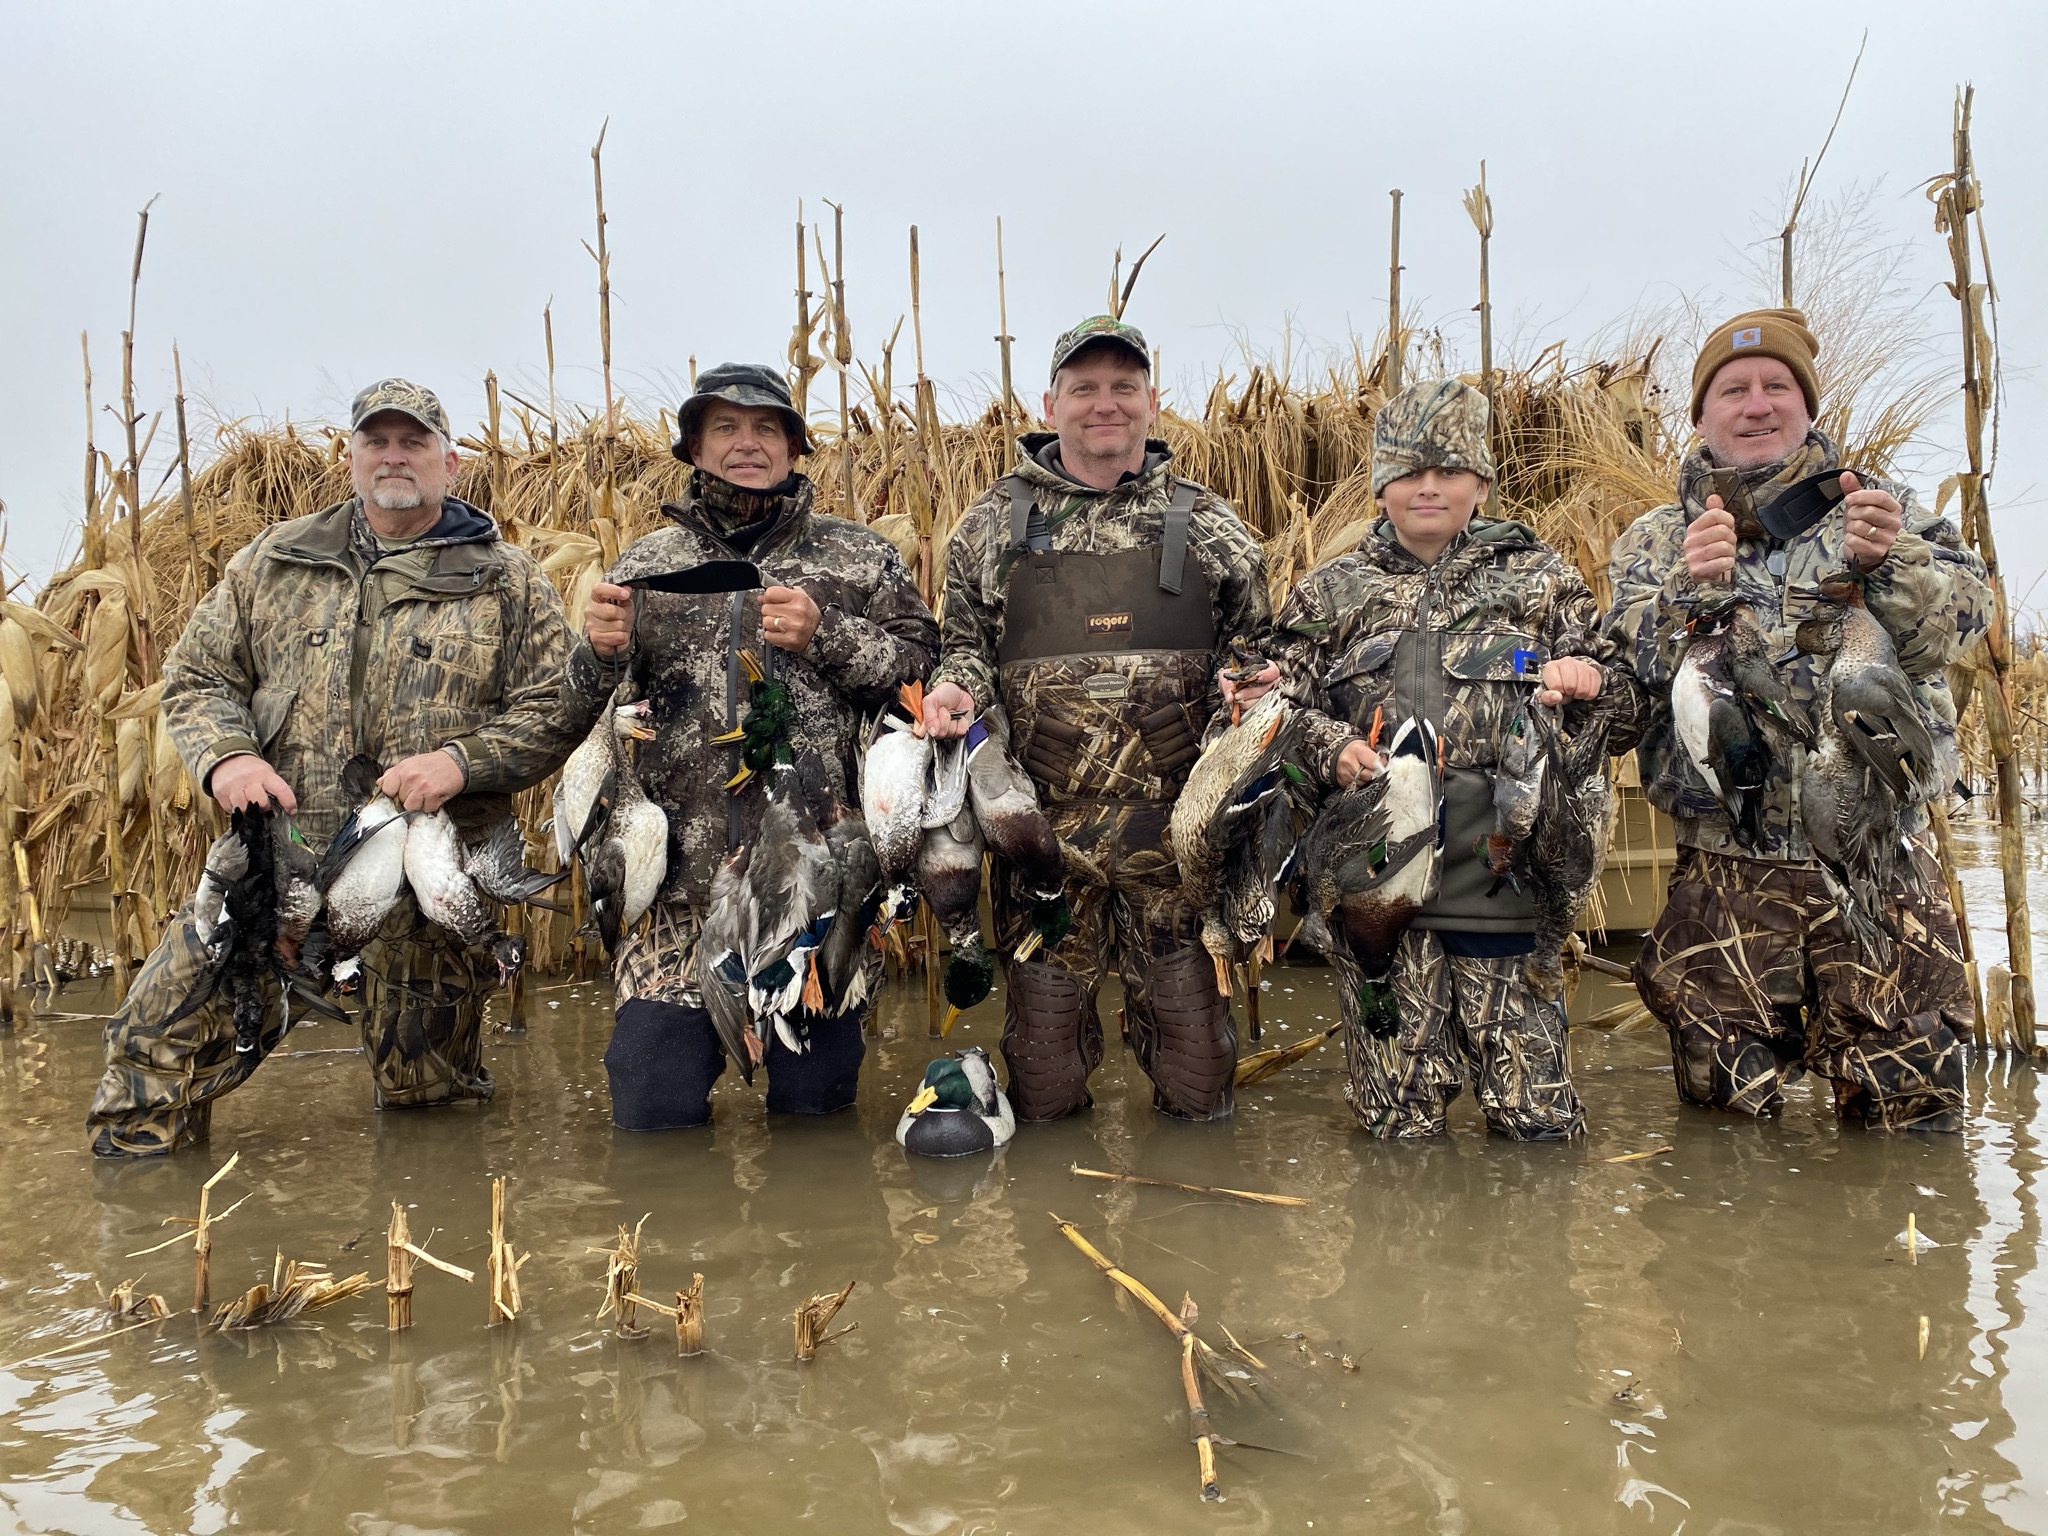 Squaw Creek Hunt Club & Guide Service - Fully Guided Duck Hunts